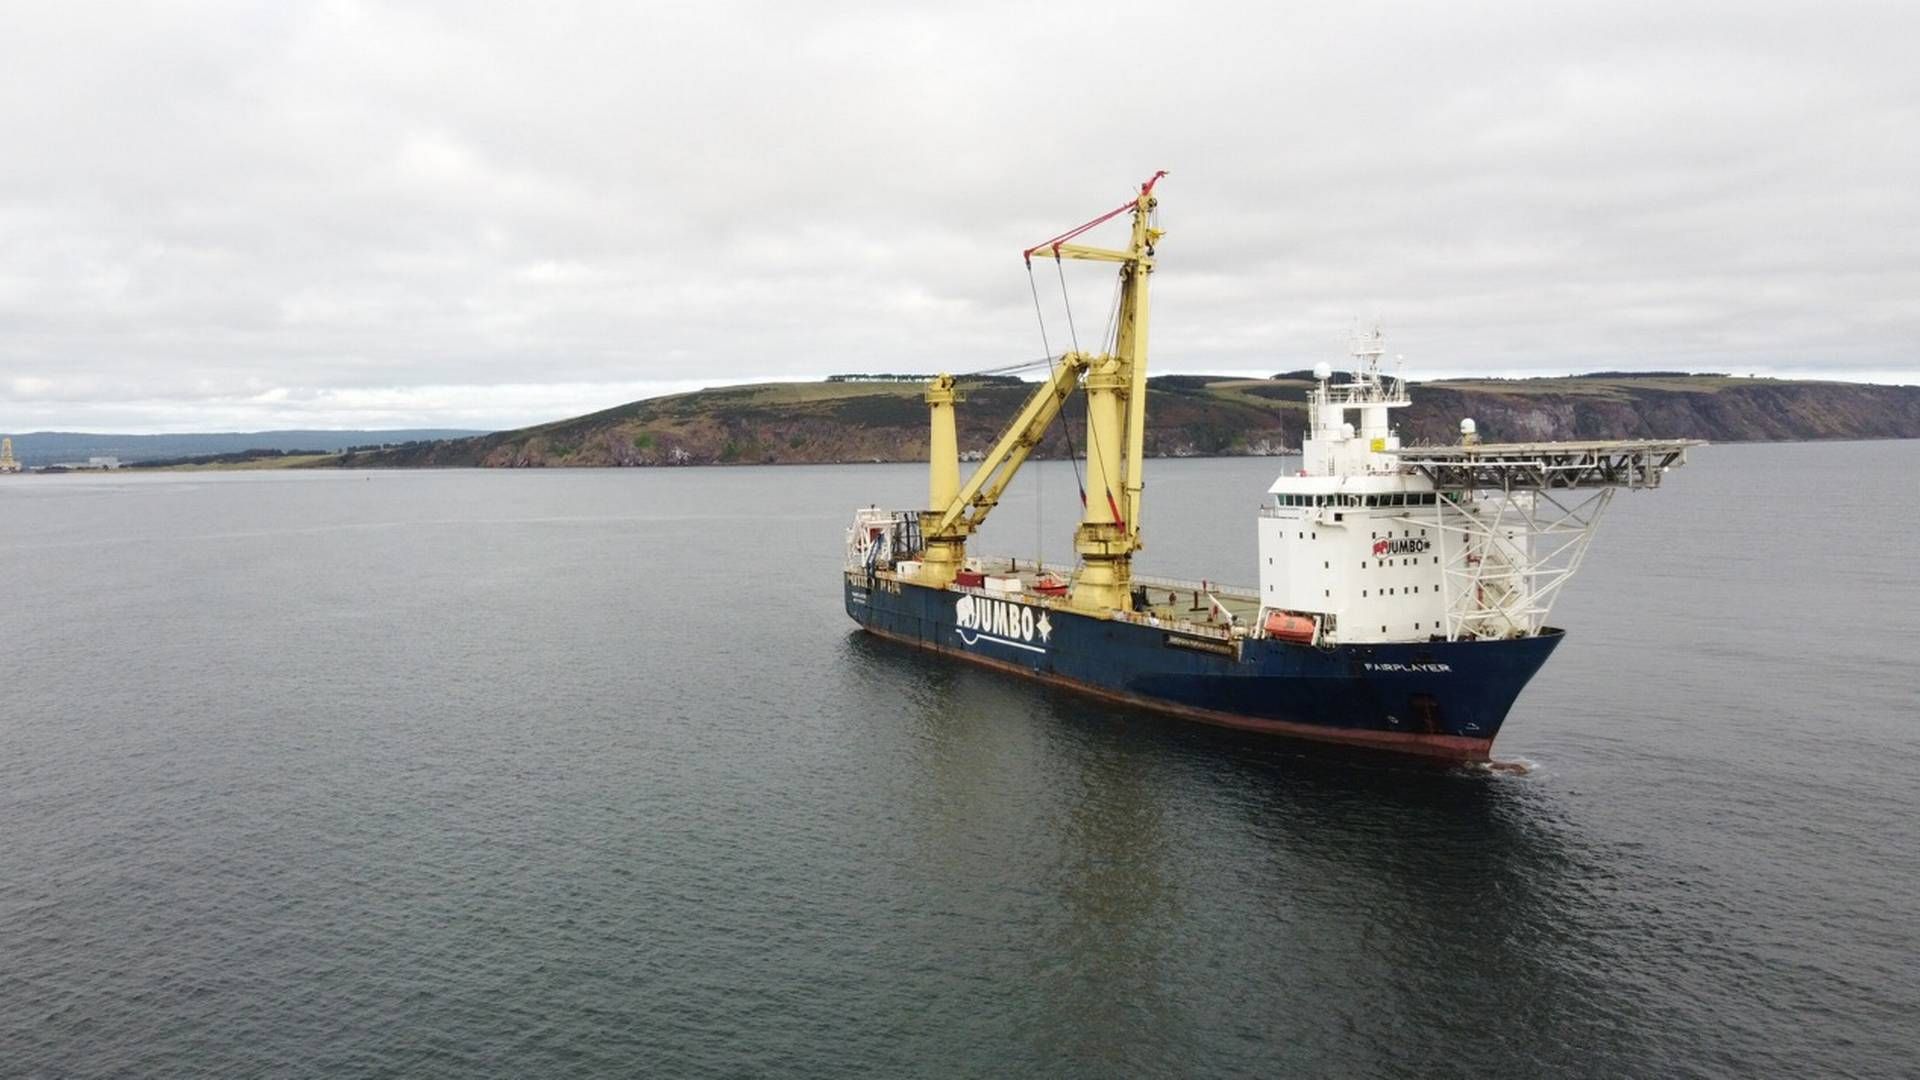 Jumbo Maritimes' vessel Fairplayer will remove two monopiles from the project and transport them back to shore. | Photo: Jumbo Maritime